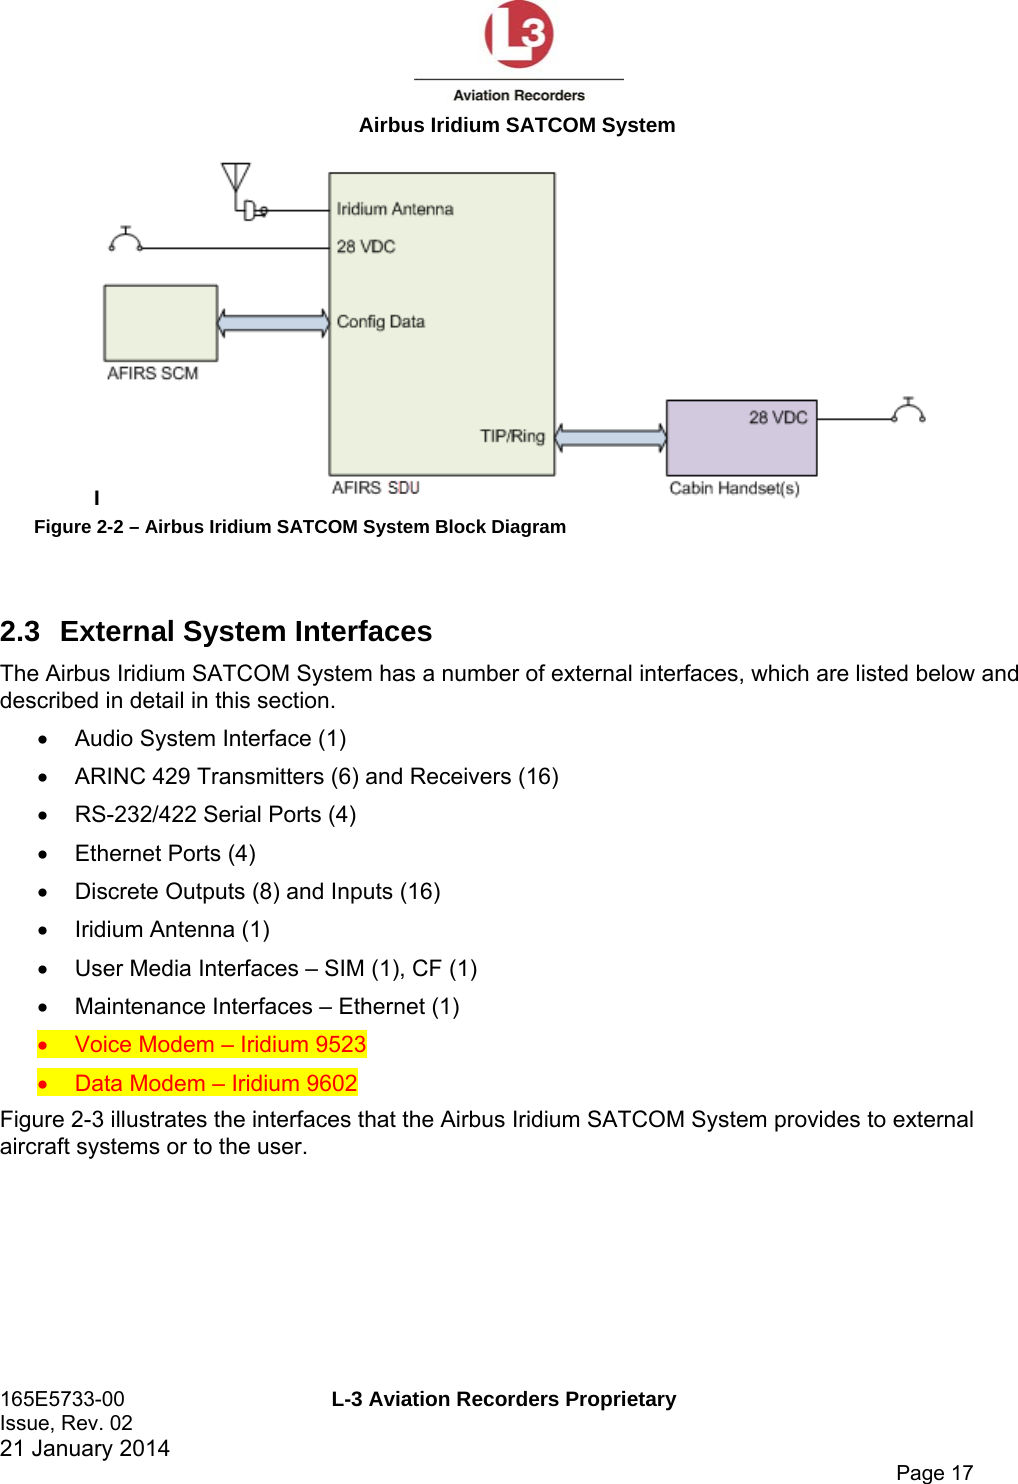  Airbus Iridium SATCOM System 165E5733-00  L-3 Aviation Recorders Proprietary Issue, Rev. 02   21 January 2014      Page 17  Figure 2-2 – Airbus Iridium SATCOM System Block Diagram  2.3  External System Interfaces The Airbus Iridium SATCOM System has a number of external interfaces, which are listed below and described in detail in this section.    Audio System Interface (1)   ARINC 429 Transmitters (6) and Receivers (16)   RS-232/422 Serial Ports (4)   Ethernet Ports (4)   Discrete Outputs (8) and Inputs (16)   Iridium Antenna (1)   User Media Interfaces – SIM (1), CF (1)   Maintenance Interfaces – Ethernet (1)   Voice Modem – Iridium 9523   Data Modem – Iridium 9602 Figure 2-3 illustrates the interfaces that the Airbus Iridium SATCOM System provides to external aircraft systems or to the user.  